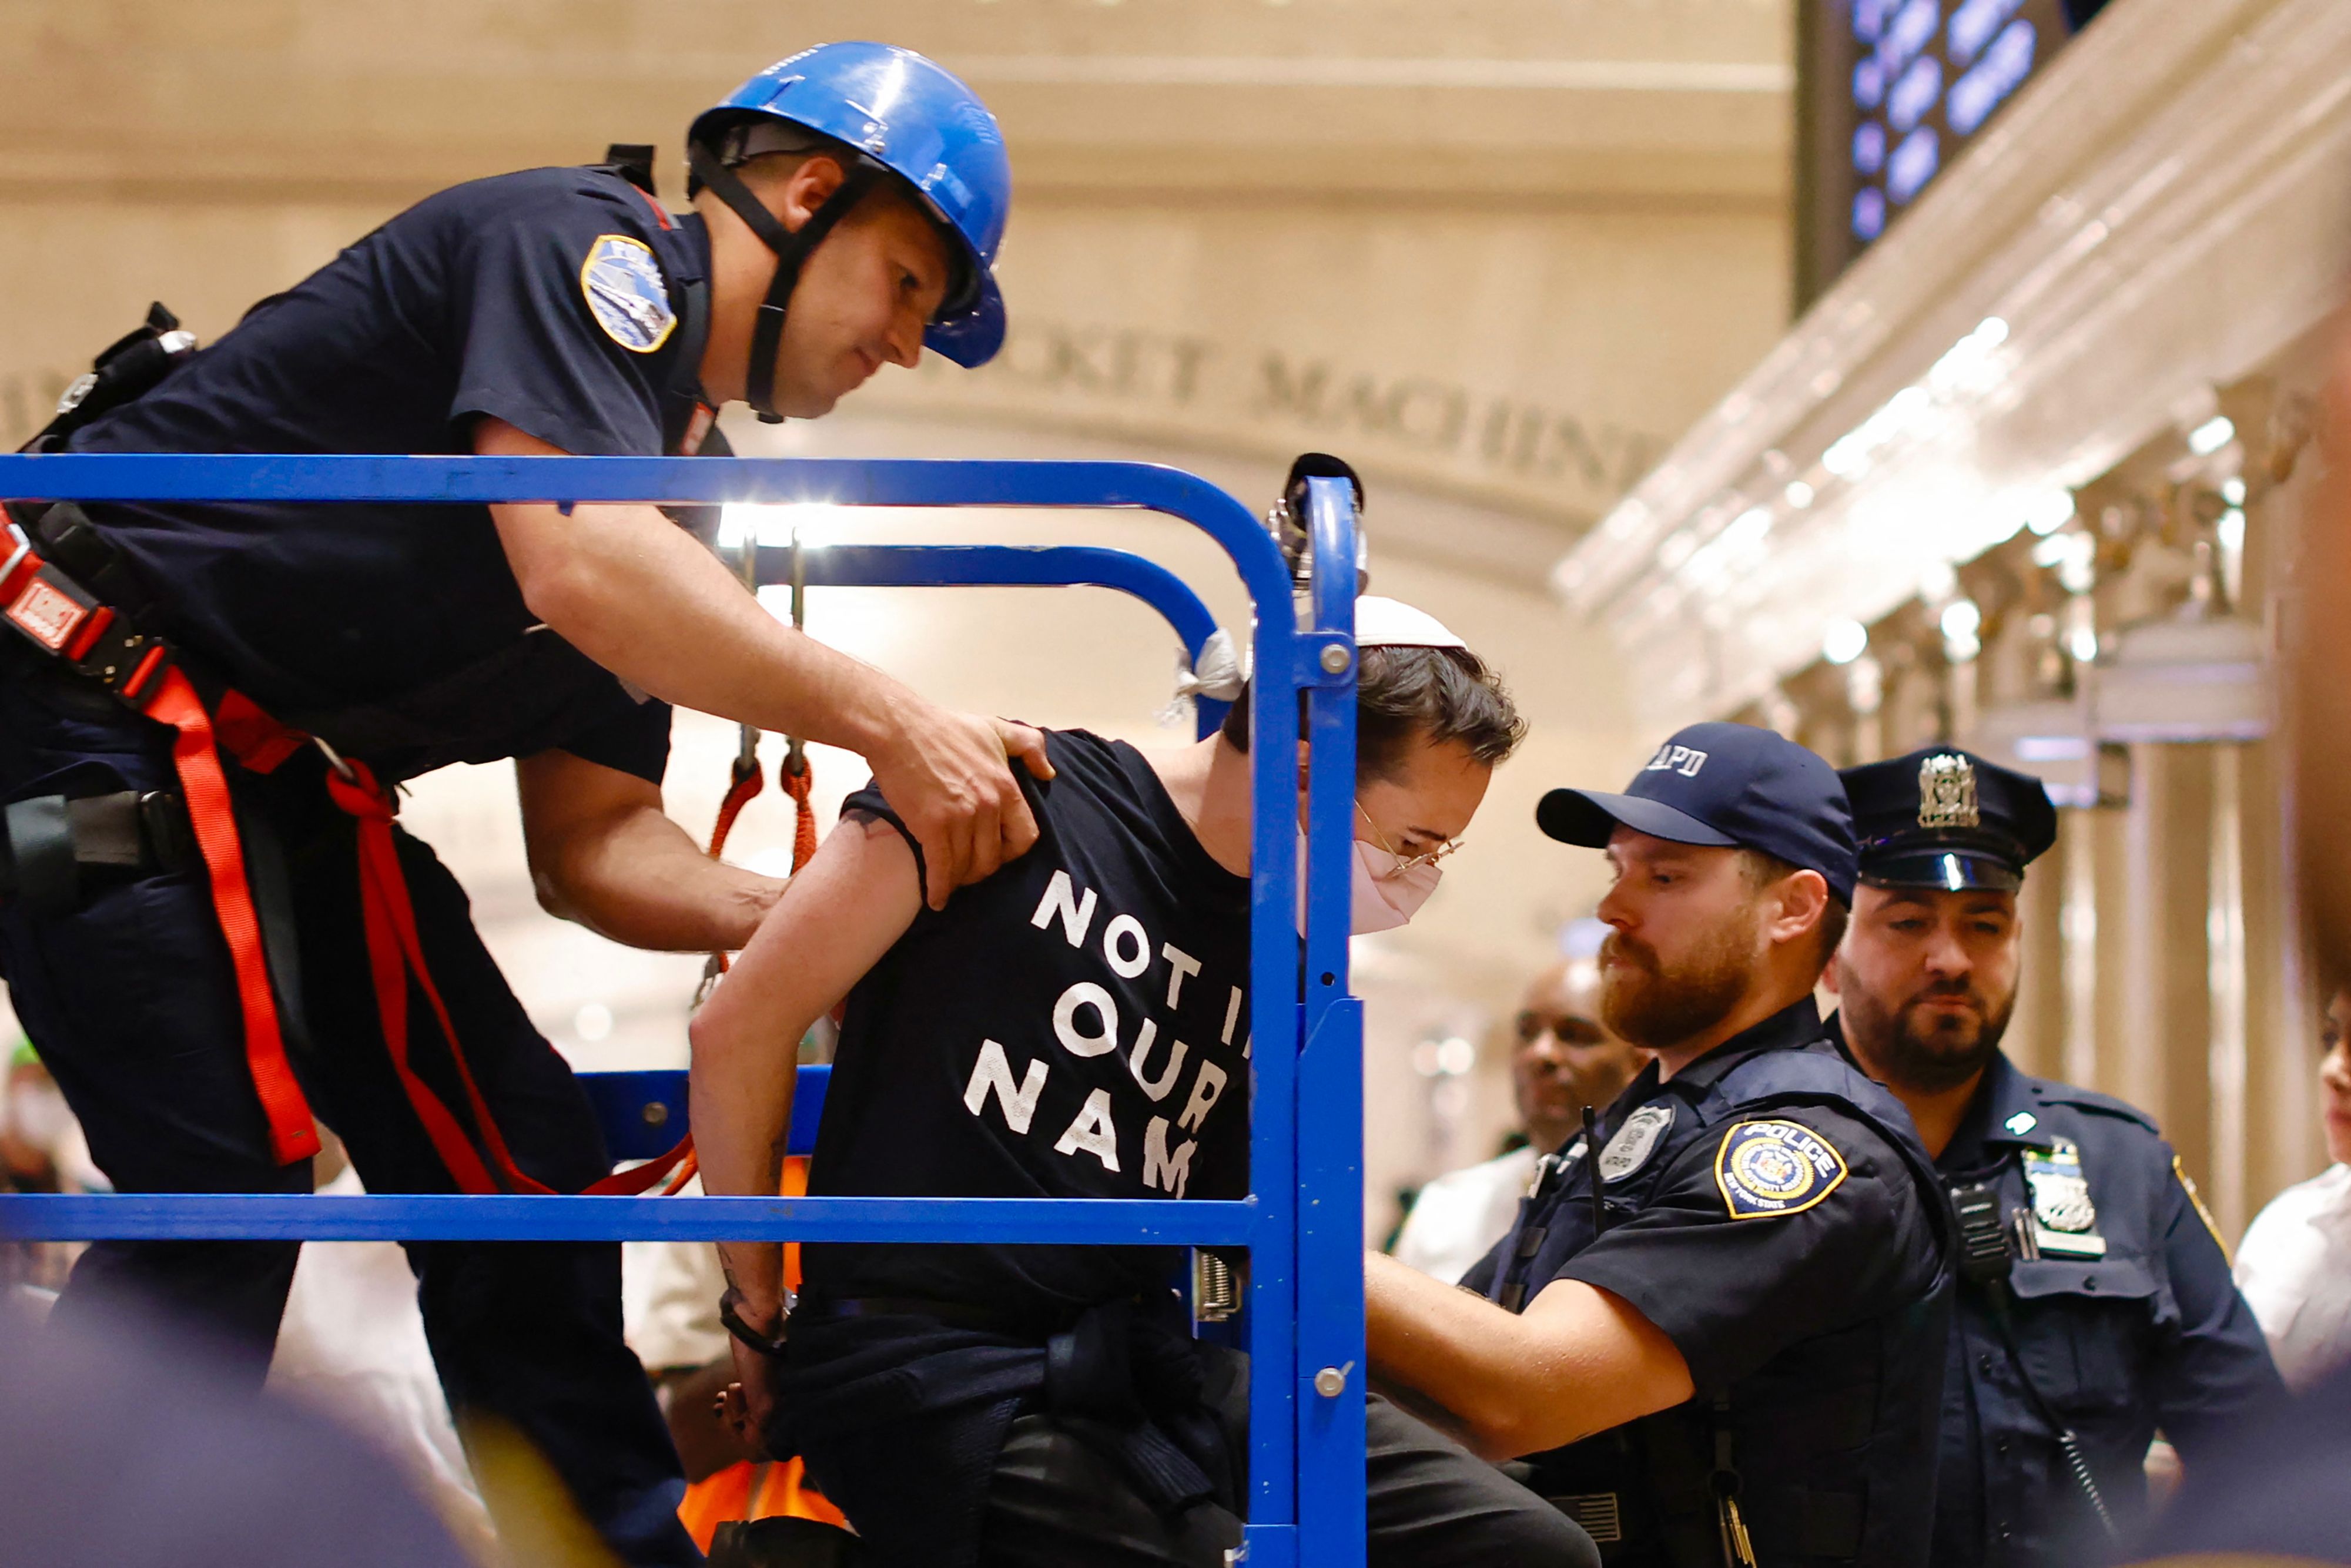 200 held as Jewish group shuts NYC's Grand Central calling for Gaza  ceasefire